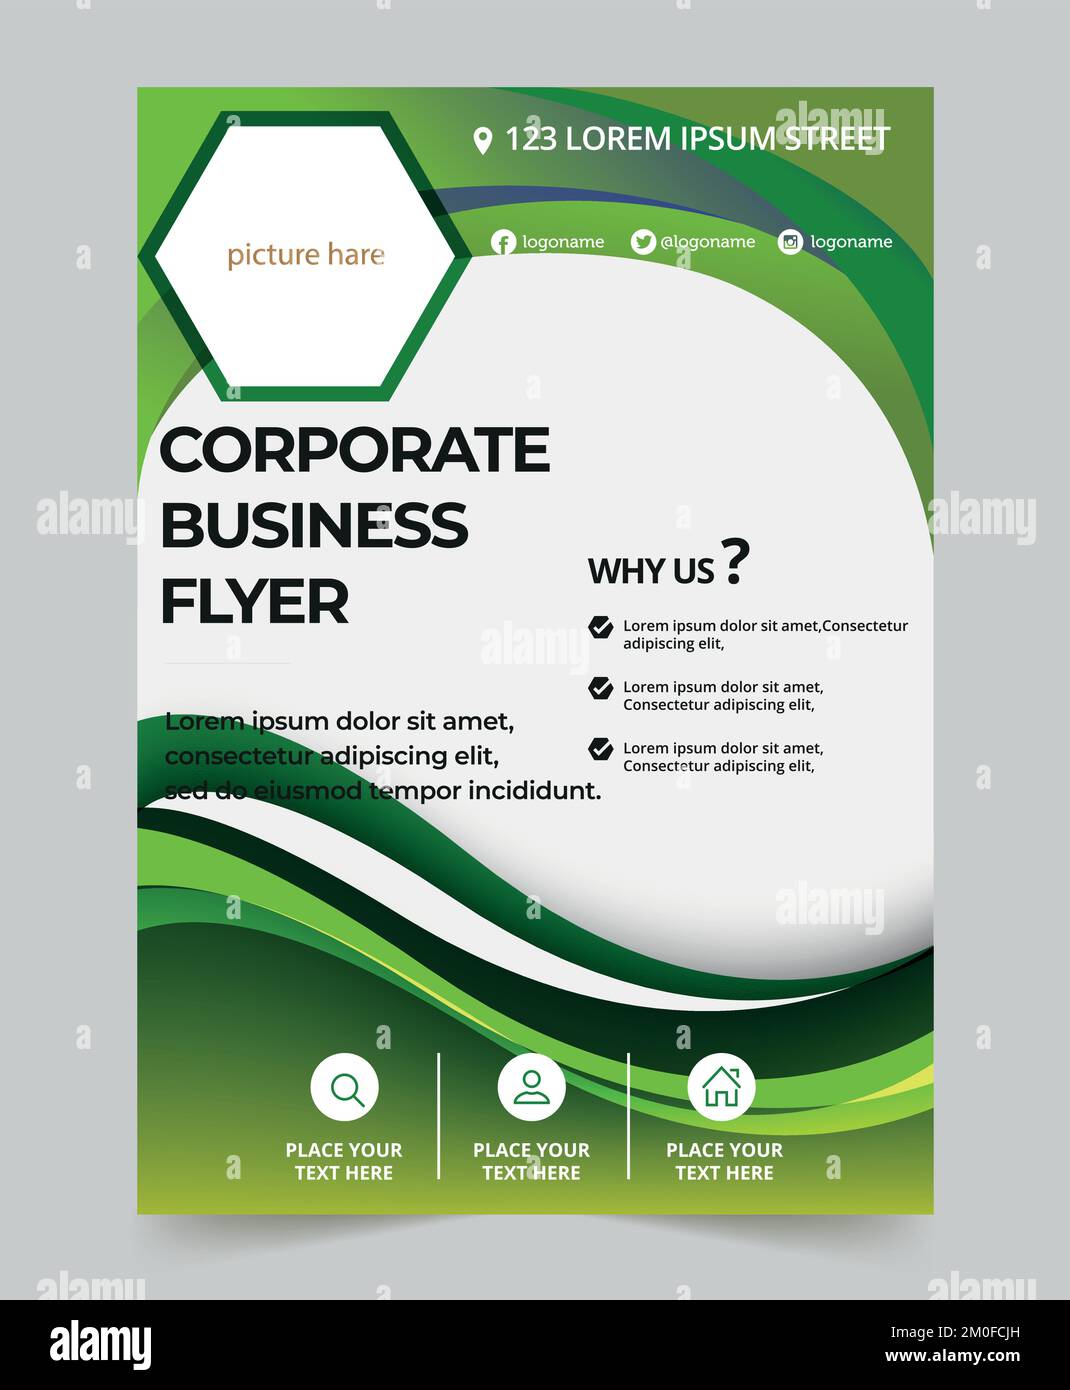 Professional business flyer design template for business Stock Vector